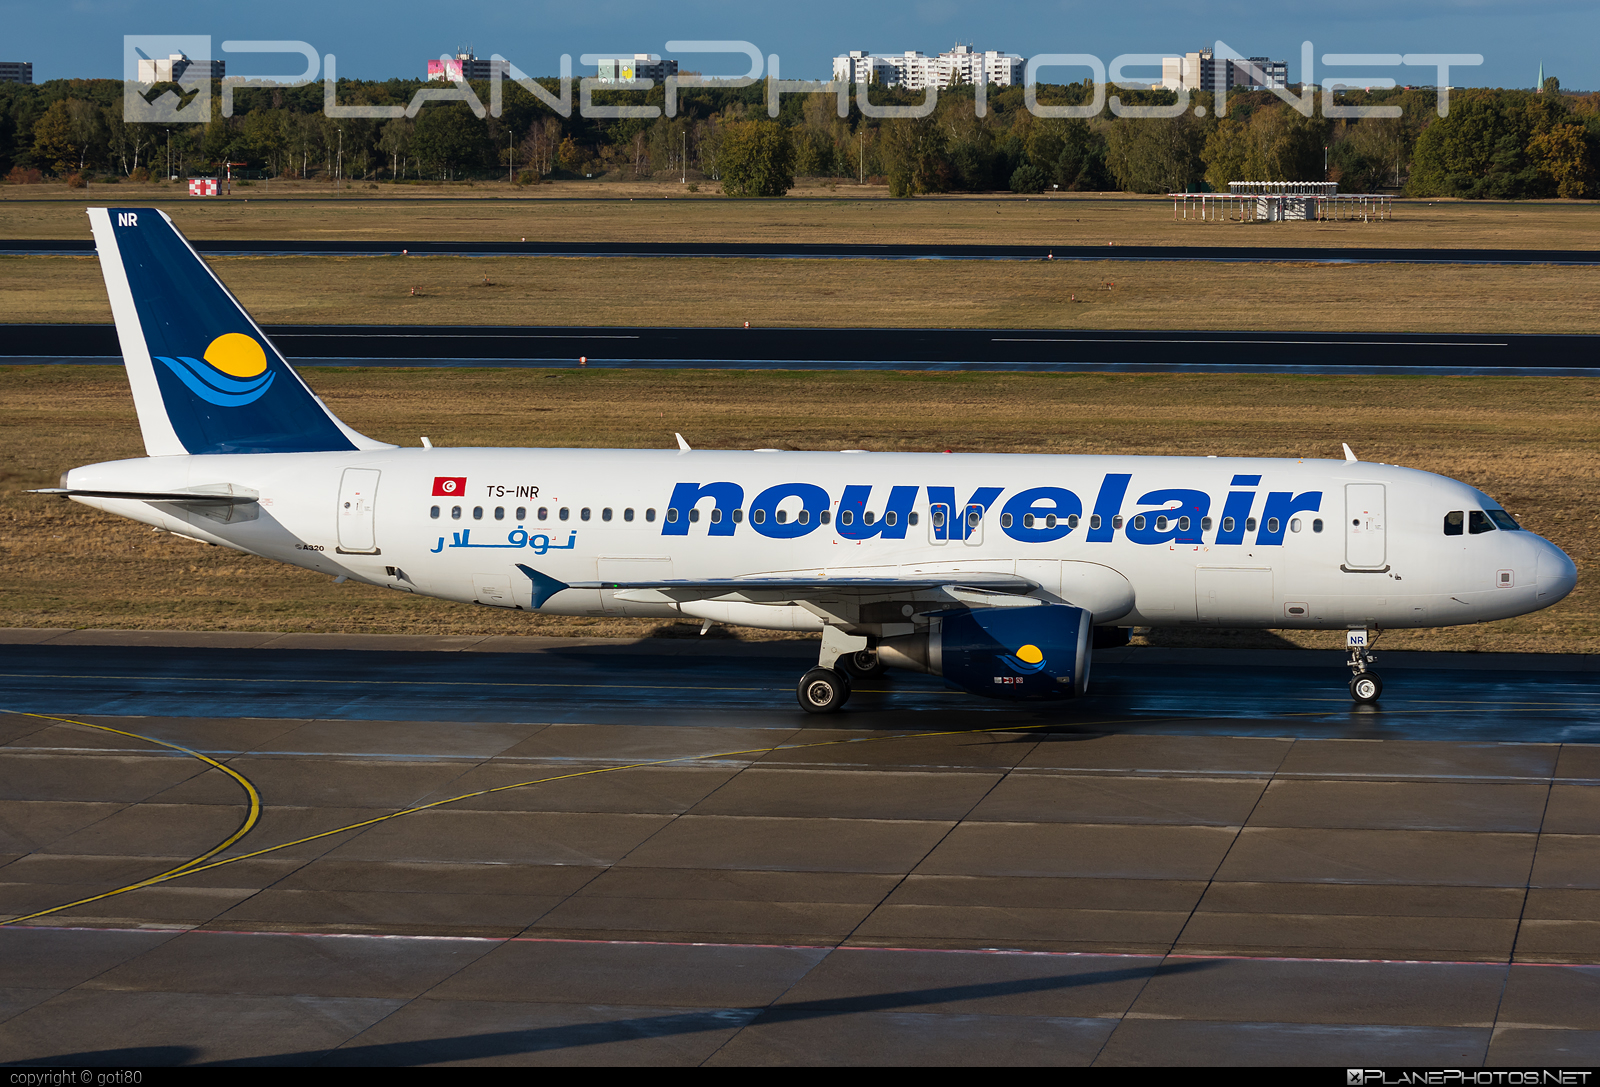 Airbus A320-214 - TS-INR operated by Nouvelair #a320 #a320family #airbus #airbus320